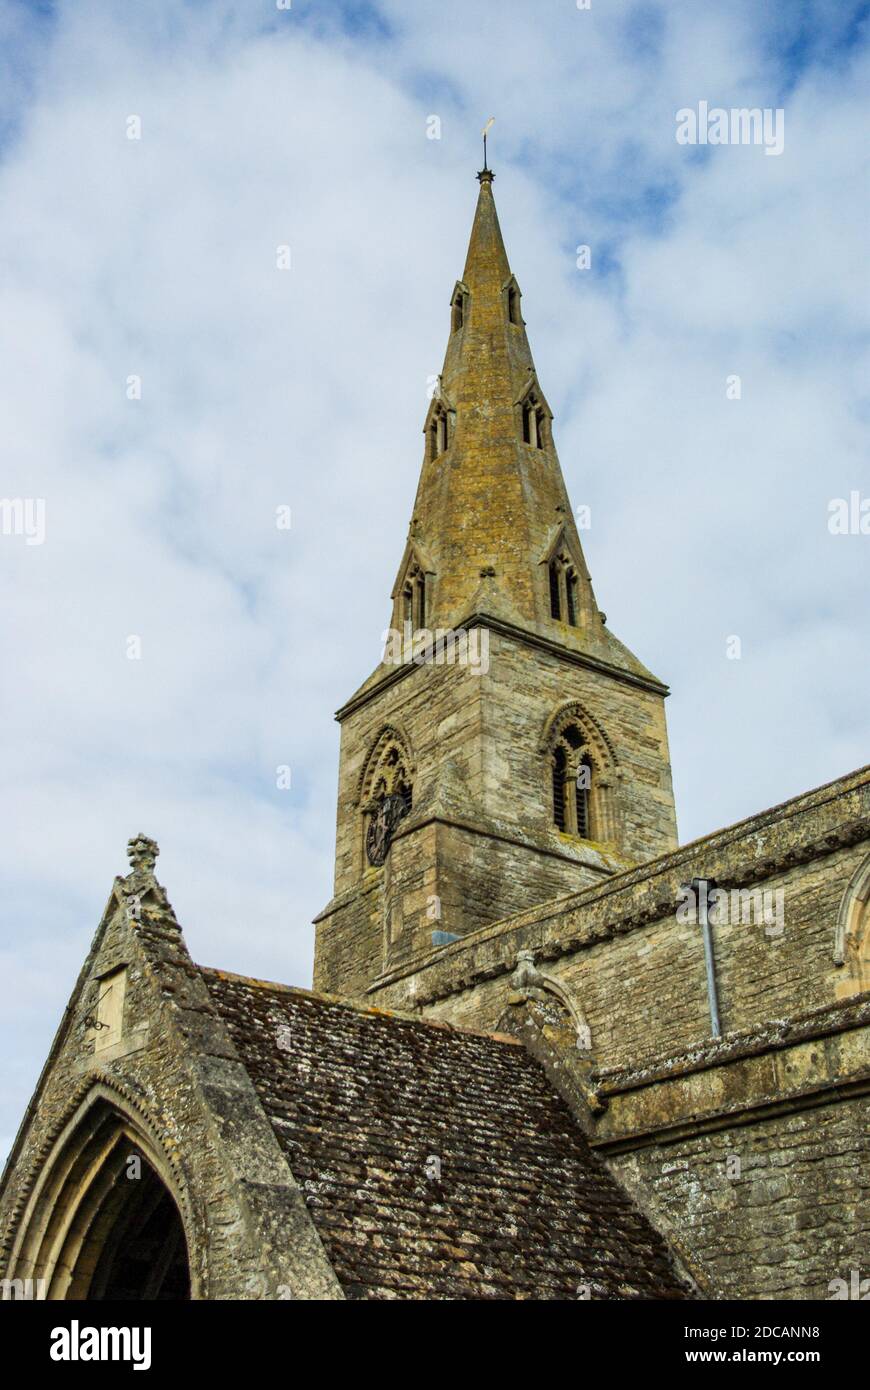 The spire of the church of St Andrew in the village of Barnwell, Northamptonshire, UK Stock Photo